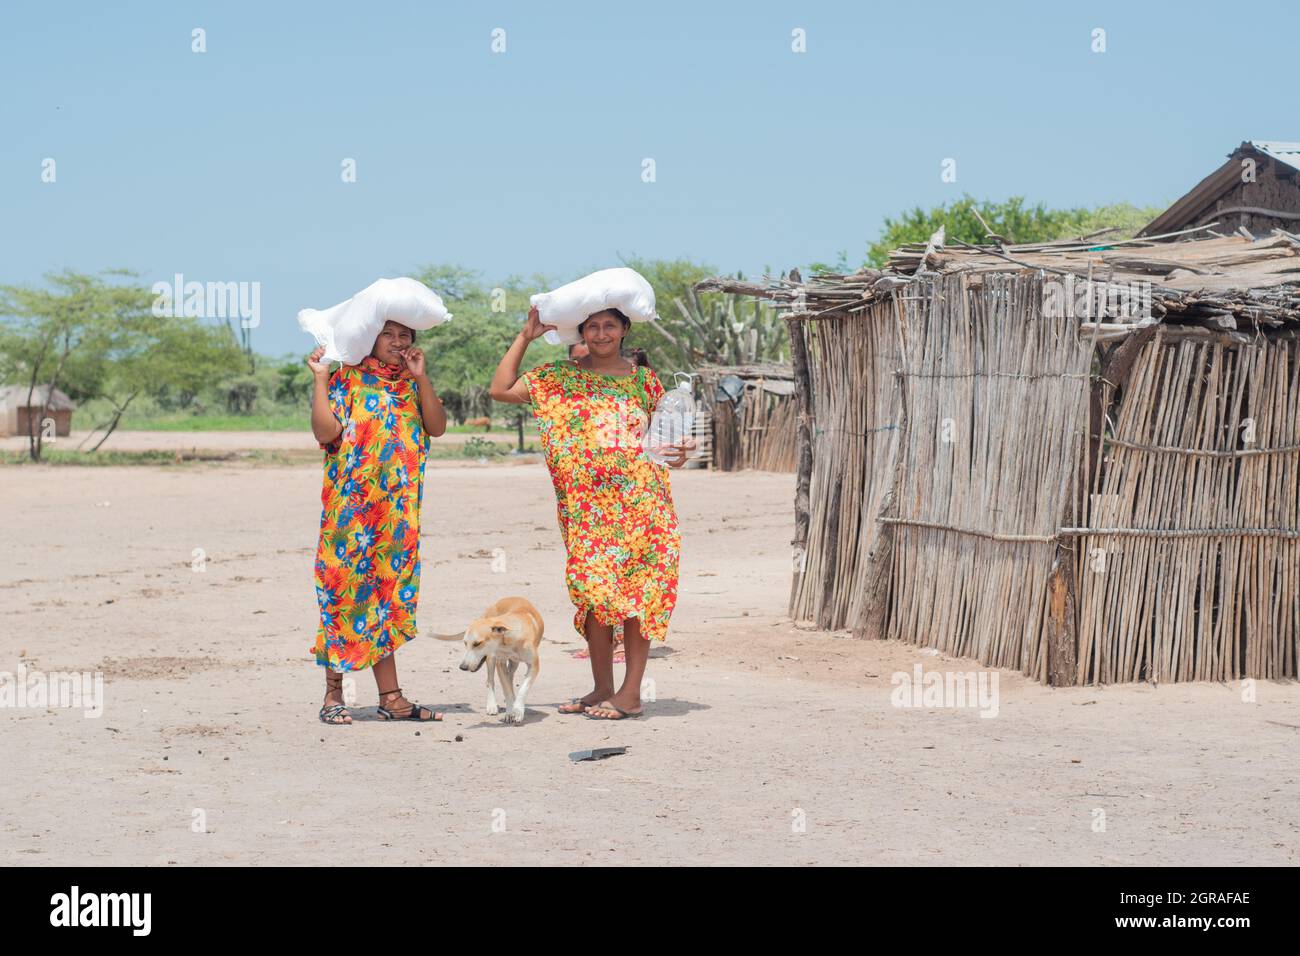 Mayapo, Colombia. 26th Sep, 2021. Women of the Wayuu indigenous community pose for a photo covering their heads from the sun during a Humanitarian Mission developed by 'De Corazon Guajira' in Mayapo at La Guajira - Colombia were they visited the Wayuu indigenous communities 'Pactalia, Poromana, Perrohuila' on September 26, 2021. The Guajira region in Colombia is the poorest region in Colombia, with its people commongly living without drinkable water, electricity and food. Credit: Long Visual Press/Alamy Live News Stock Photo